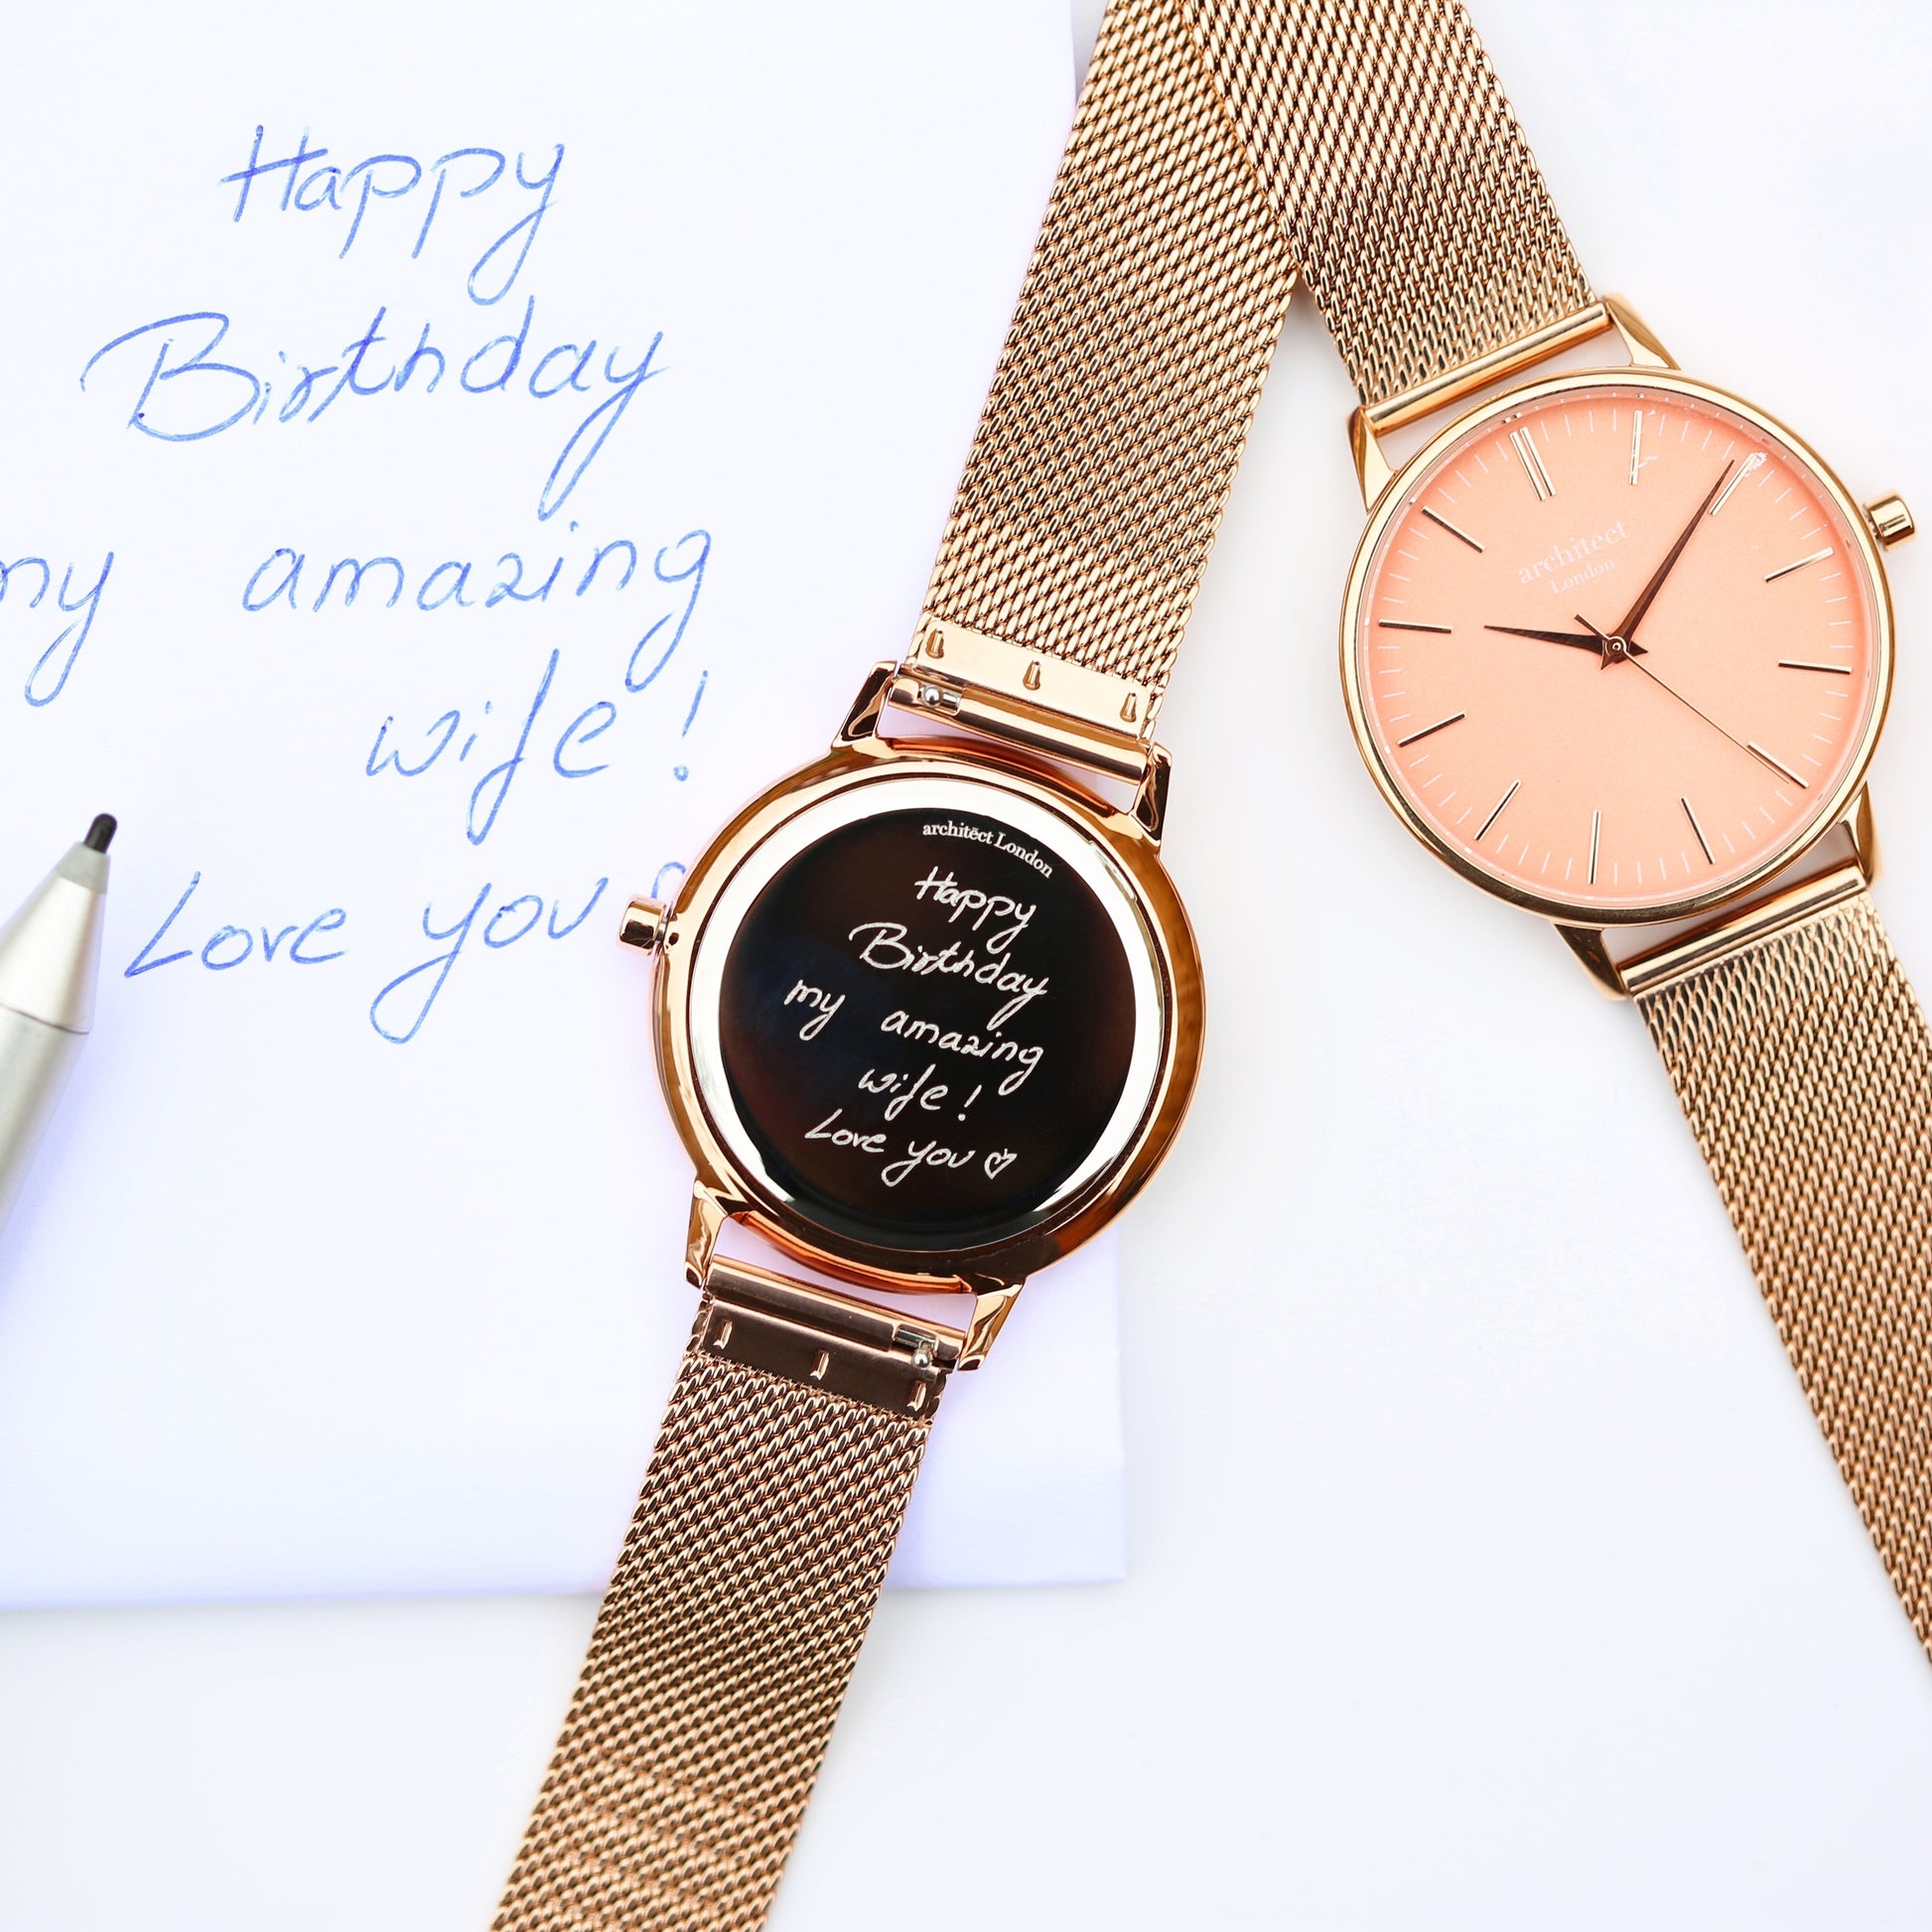 Personalized Ladies' Watches - Handwriting Engraved Watch In Rose Gold Strap 